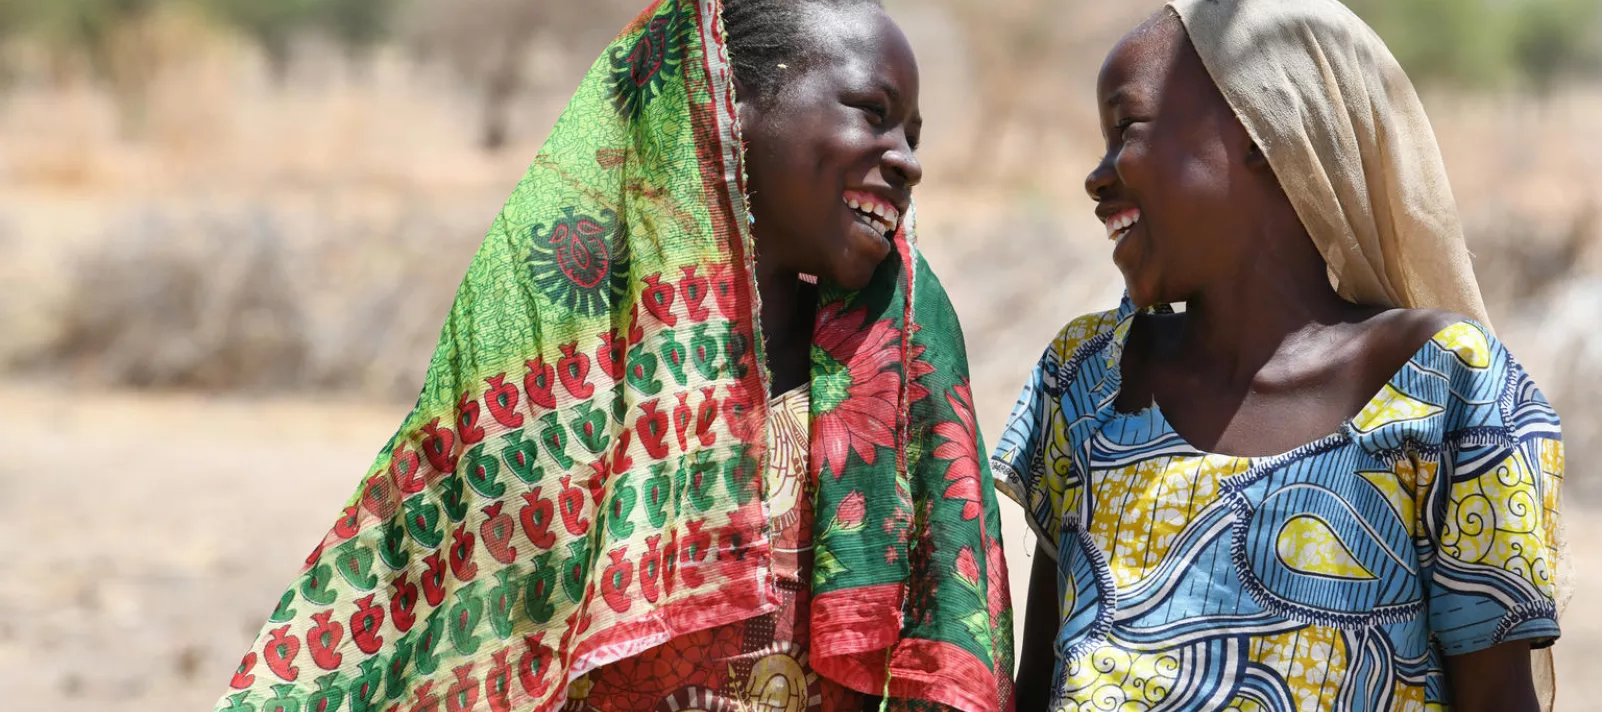 Happy girls in the village of Alibeit, in the South of Chad.  For every child, friendship.